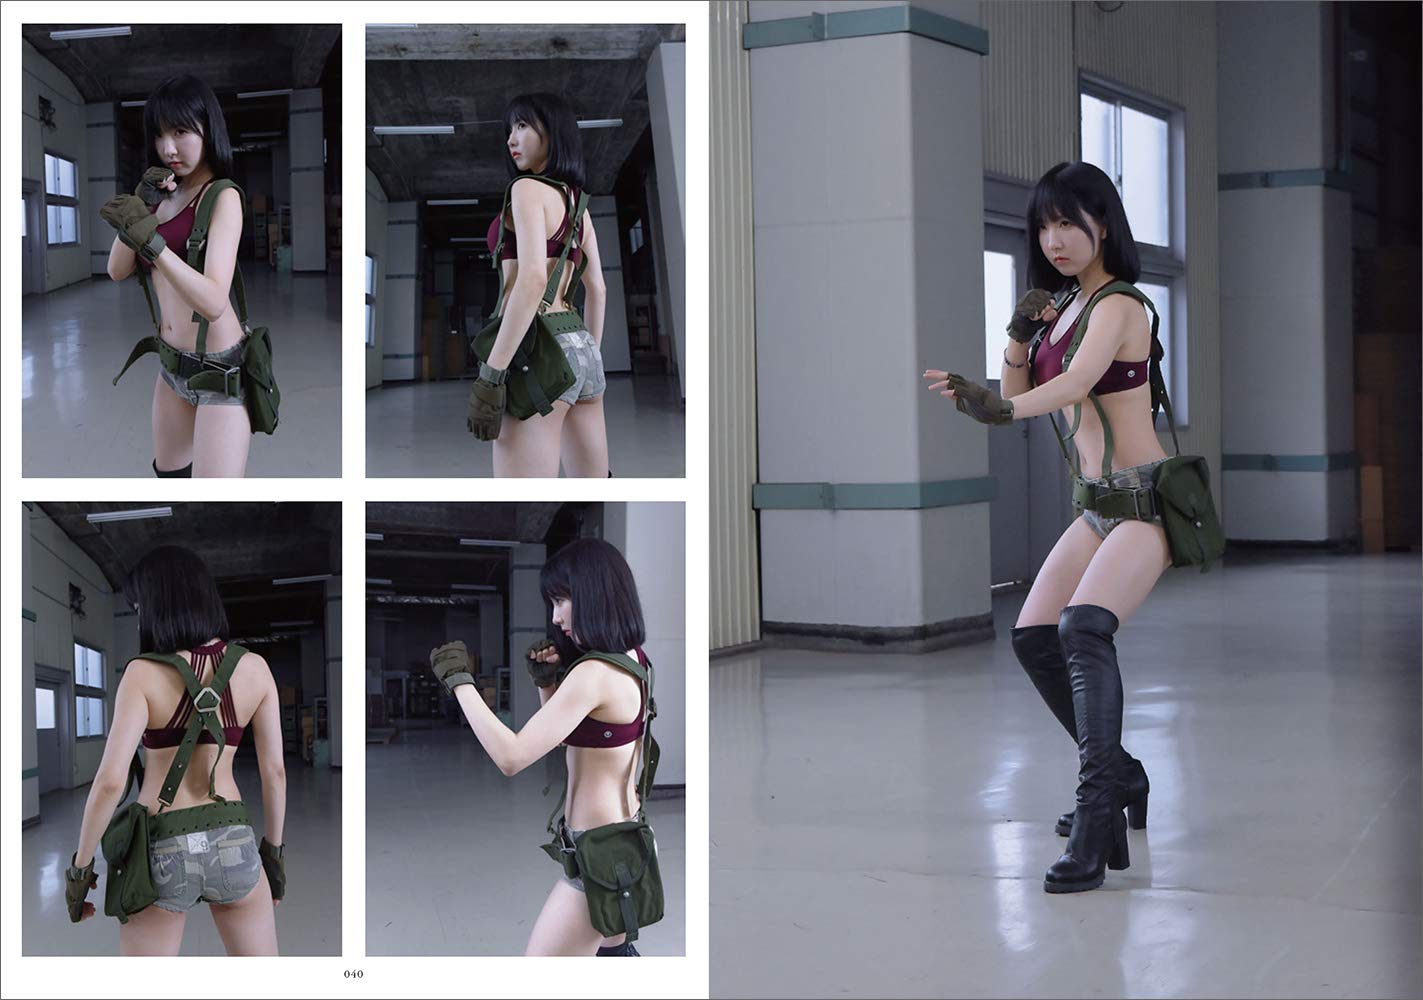 Collection of Cosplay Fighting Poses